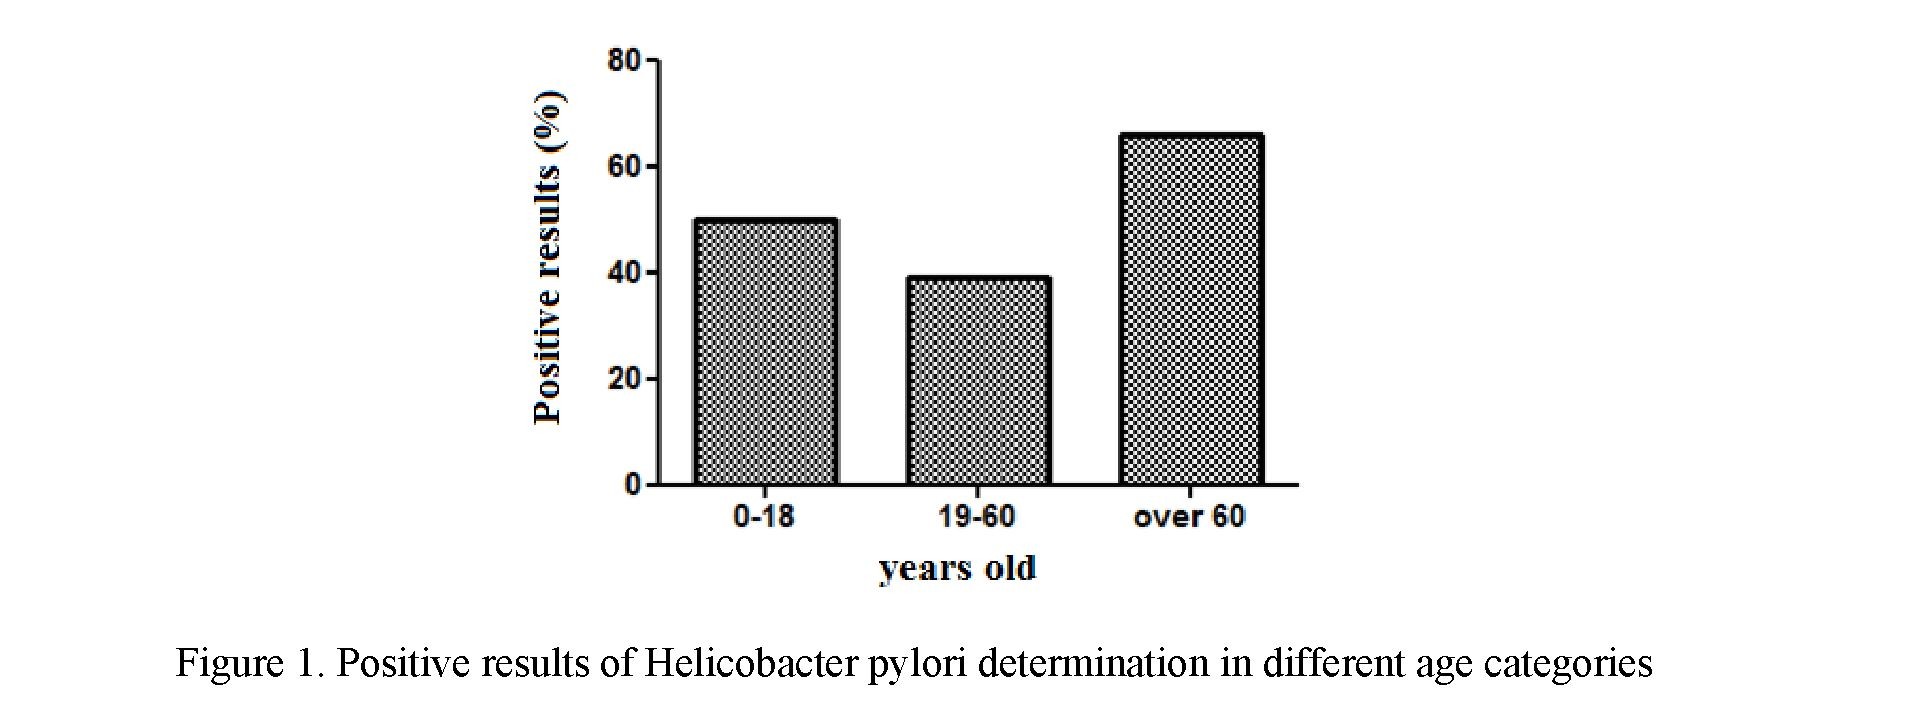 Determination of Helicobacter pylori by ELISA: single-center experience